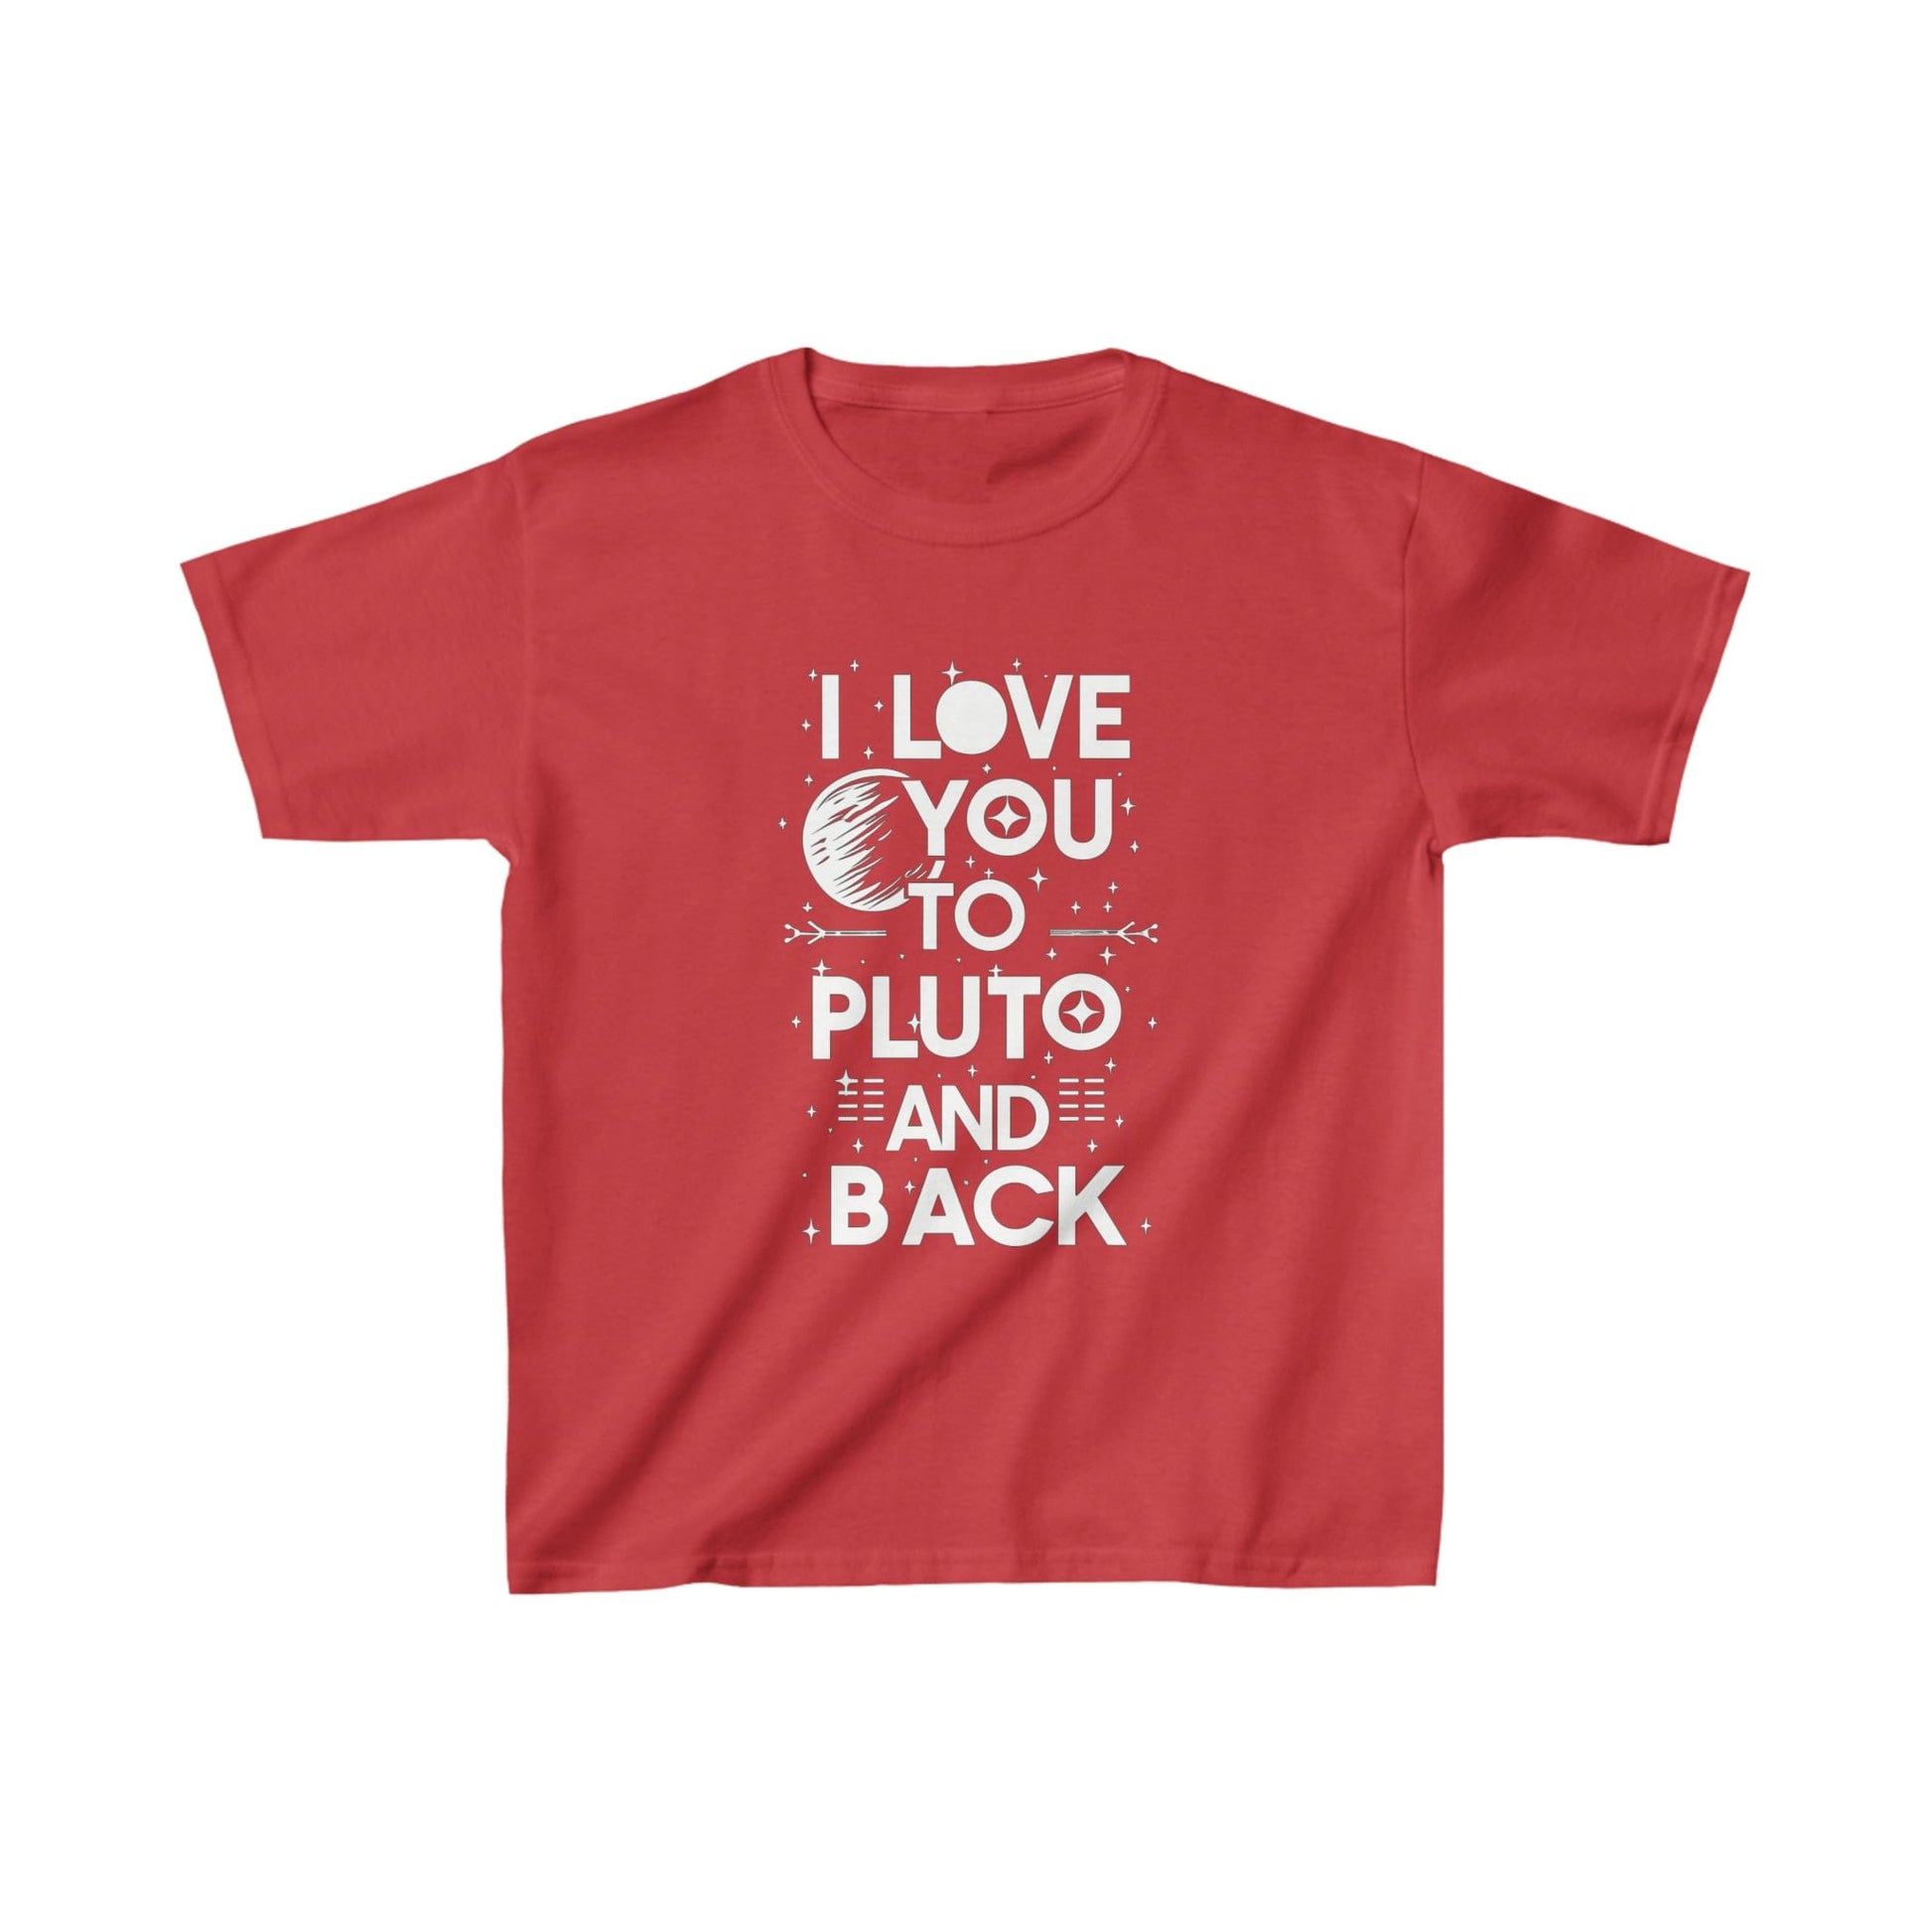 Kids clothes XS / Red Youth I Love You to Pluto T-Shirt